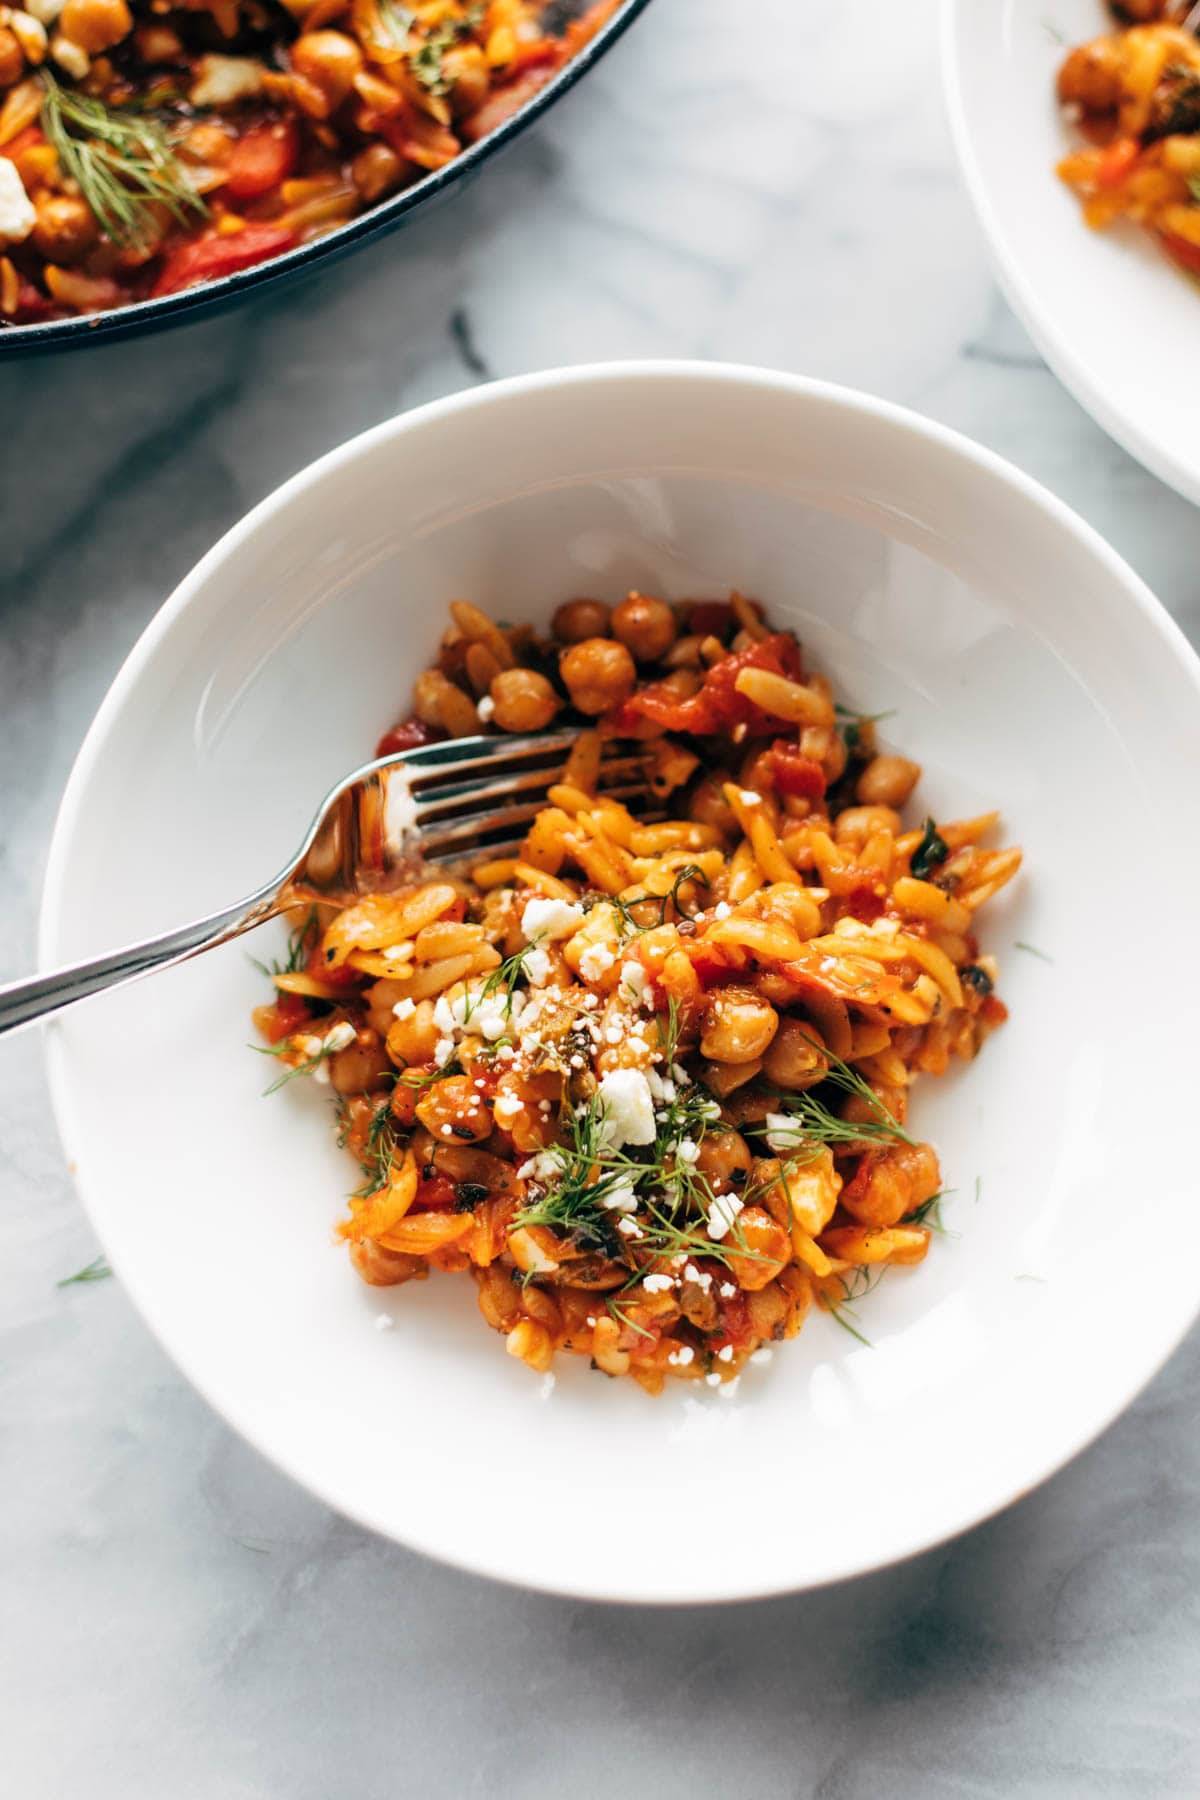 Greek Baked Orzo in a bowl with a fork.